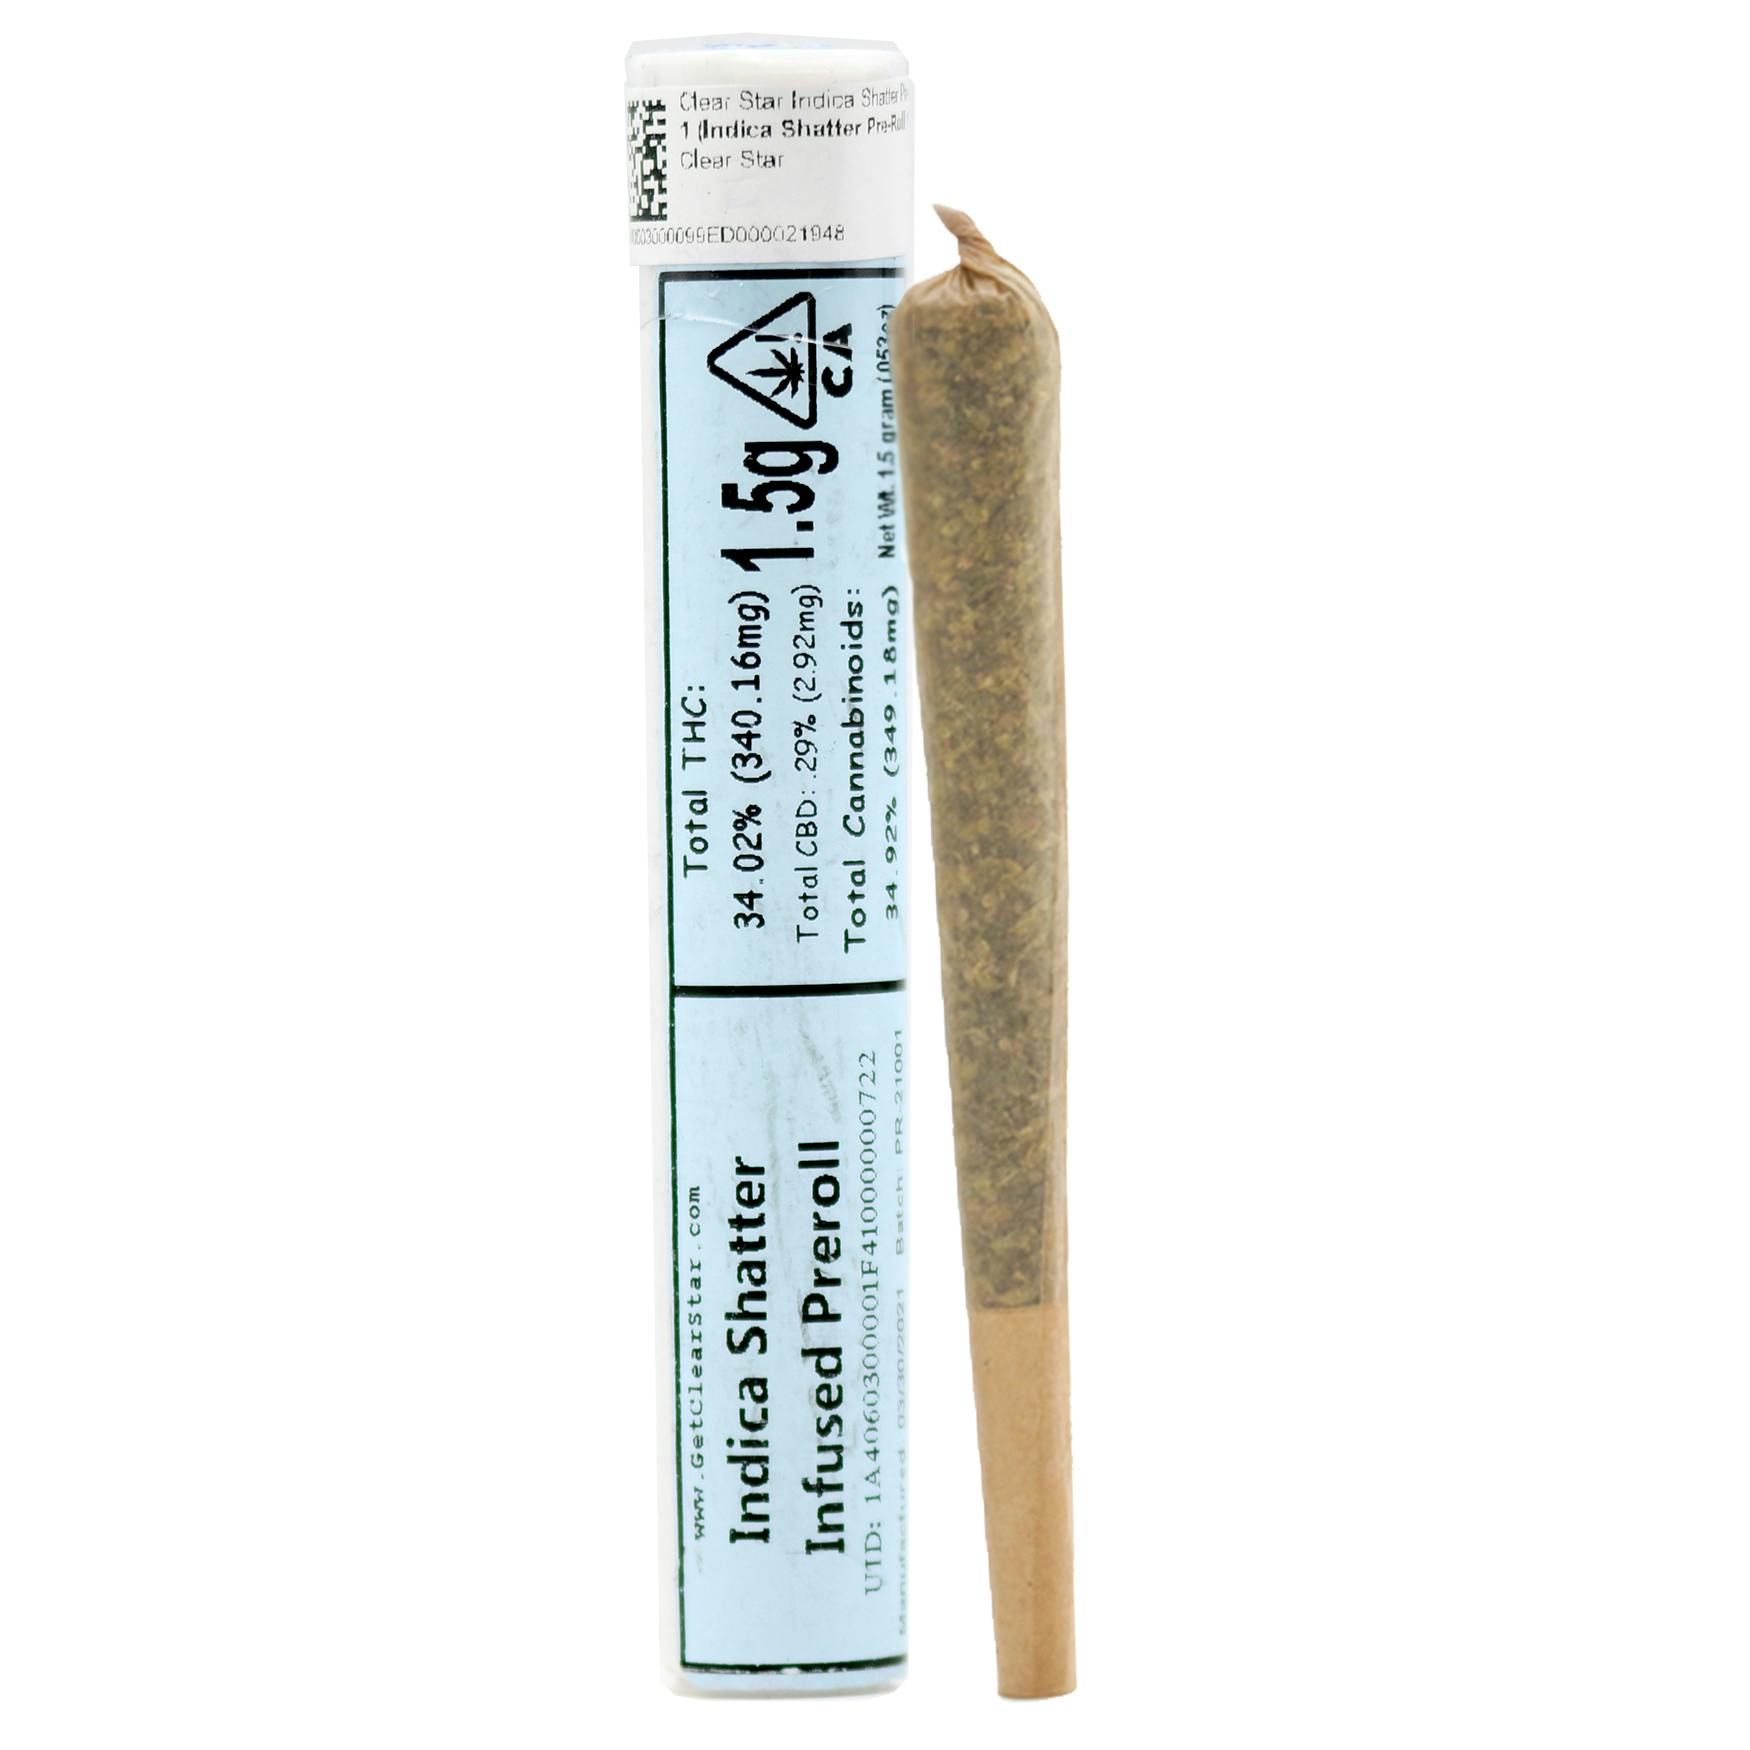 Clear Star Indica Shatter Preroll 1.5g - Indica Shatter Pre-Roll 1.5G